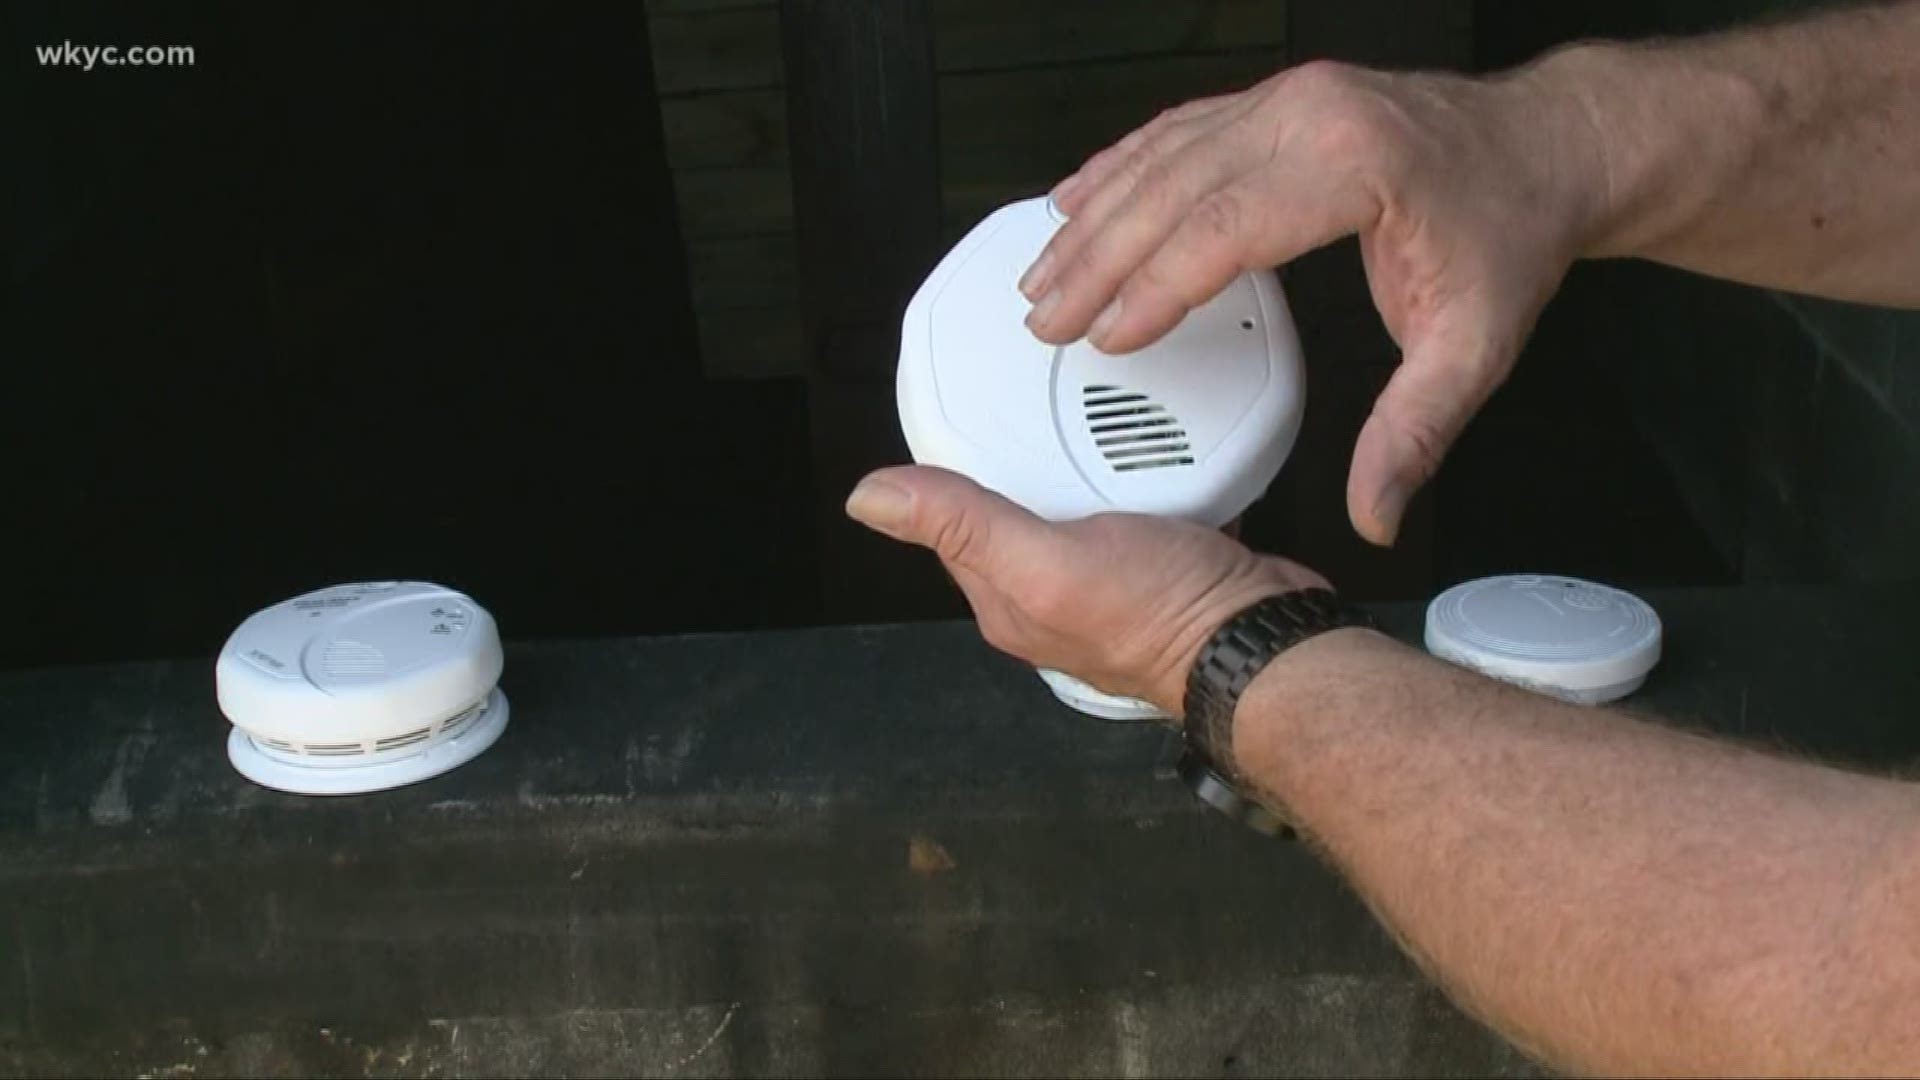 3News investigator Rachel Polansky teamed up with Parma Fire Department in this report.  We wanted to find out what is the best smoke detector for your home.